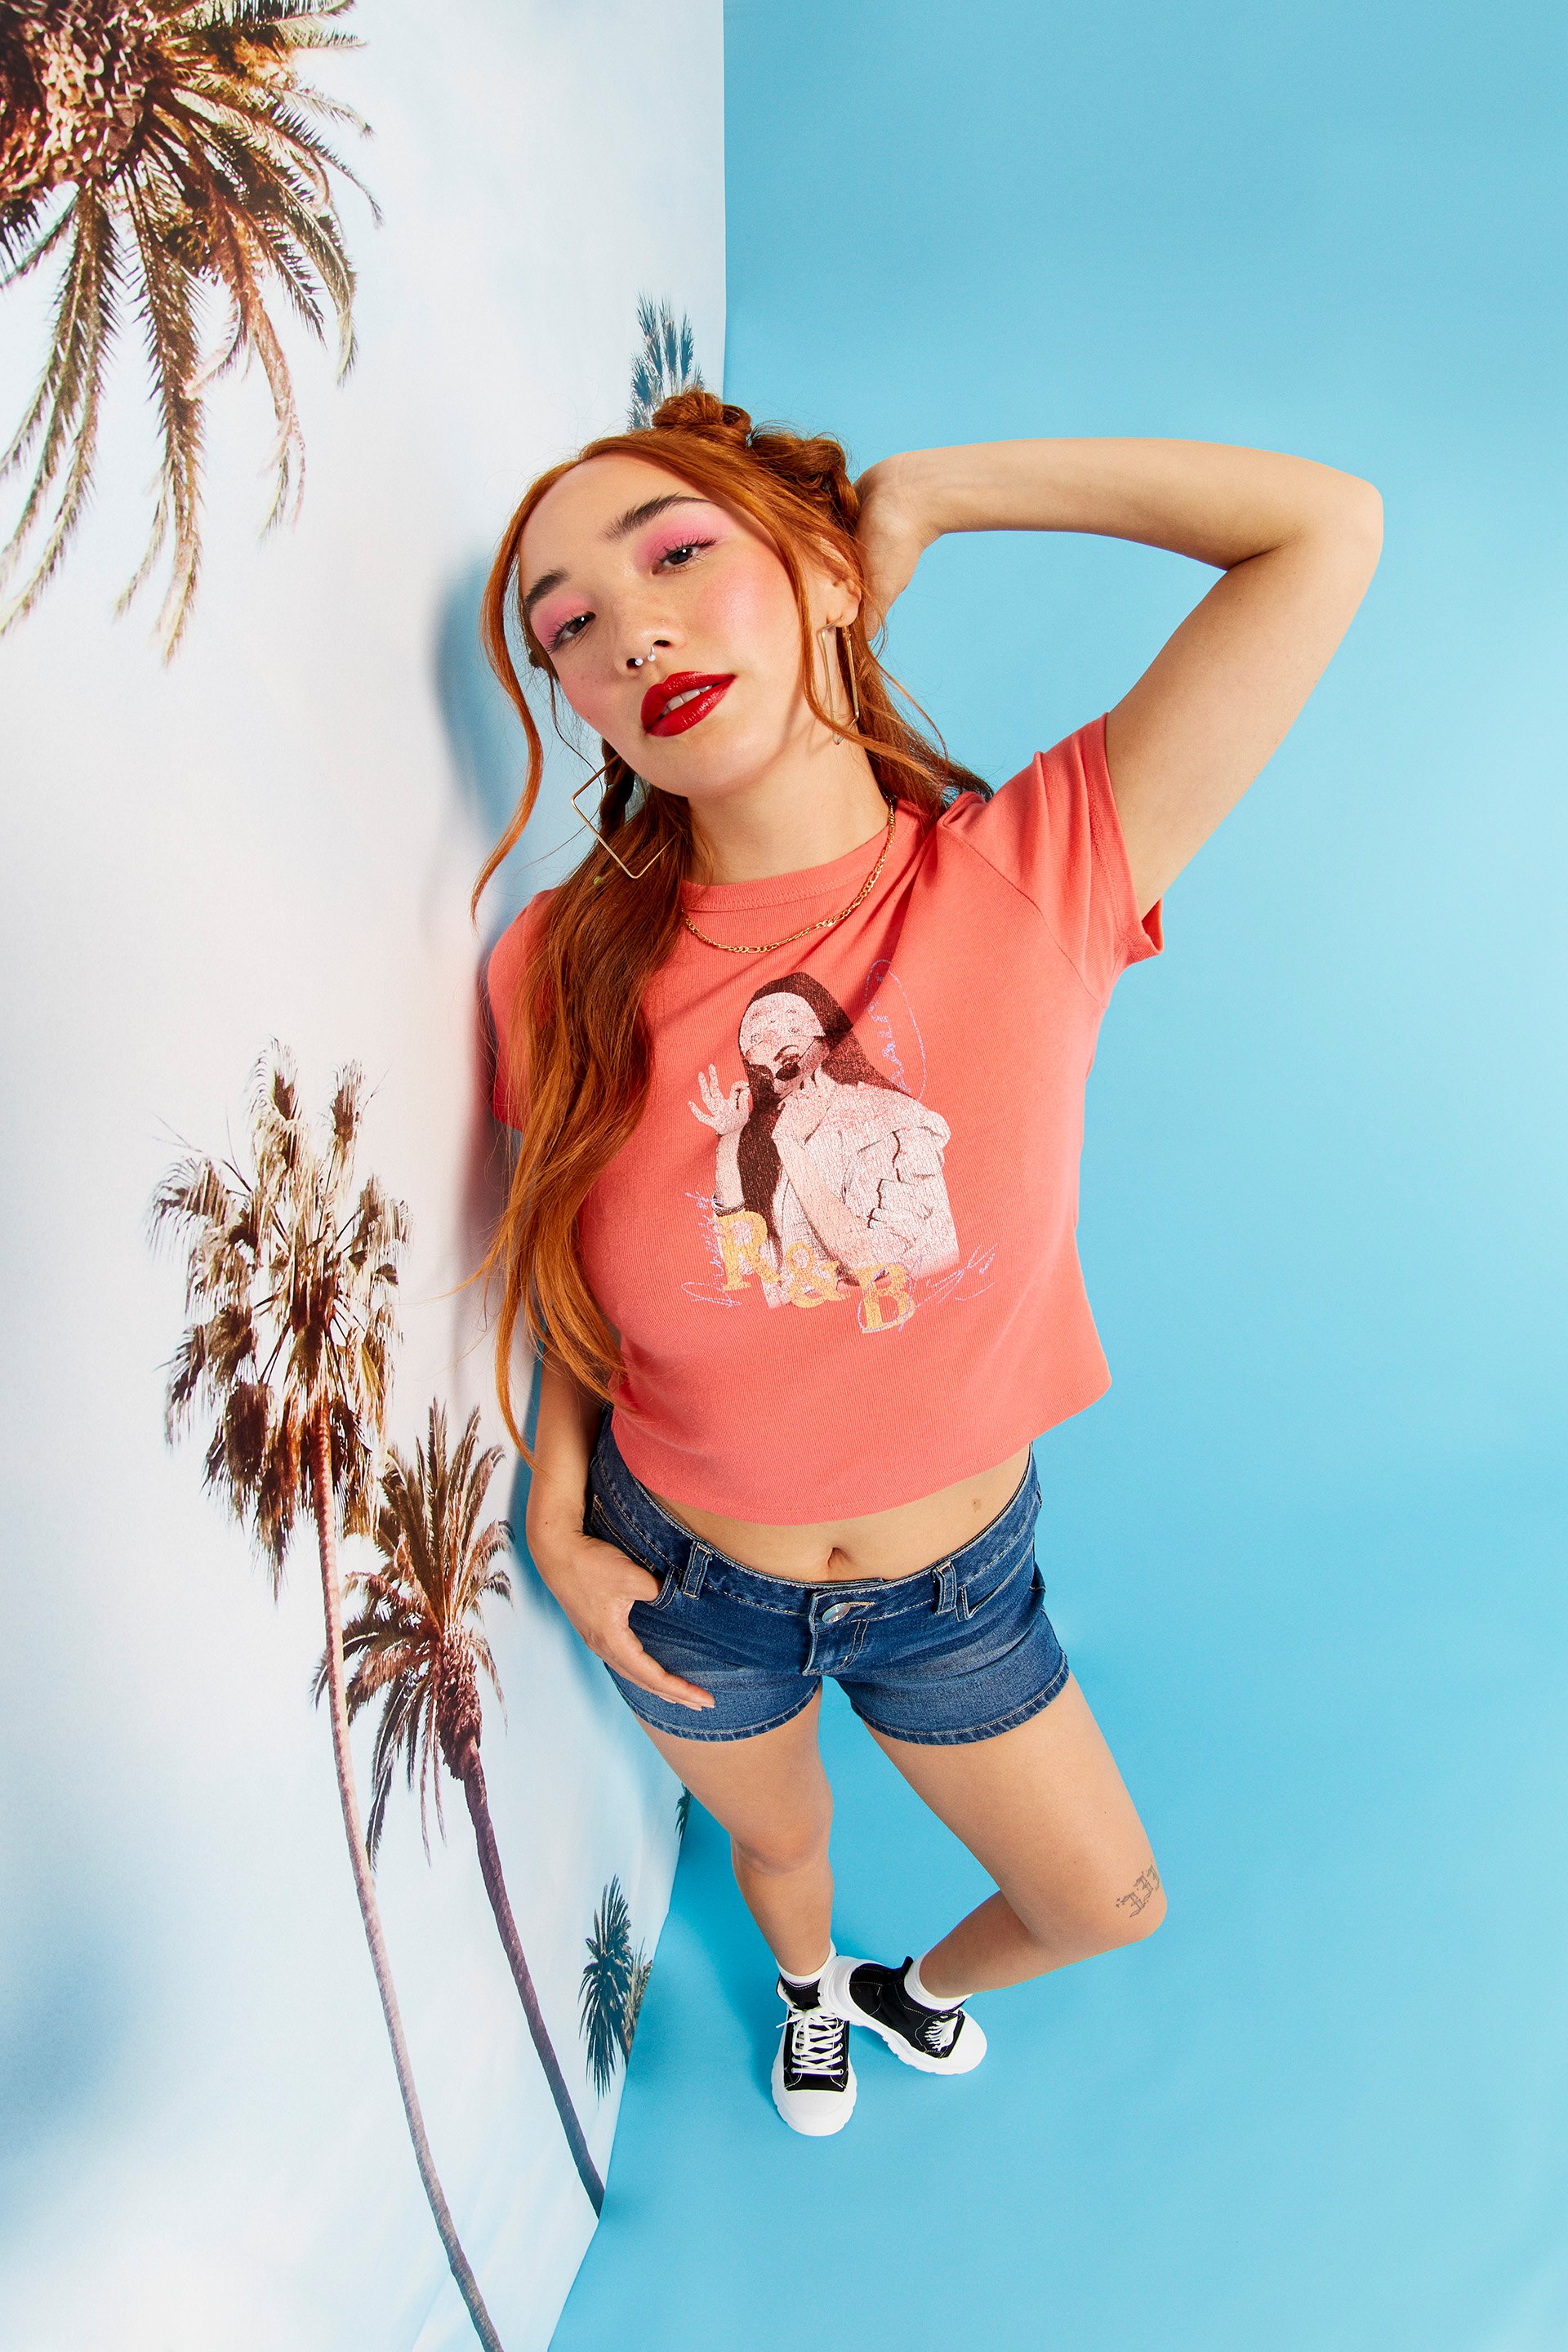 A female model wearing jean shorts and a graphic tee from rue21